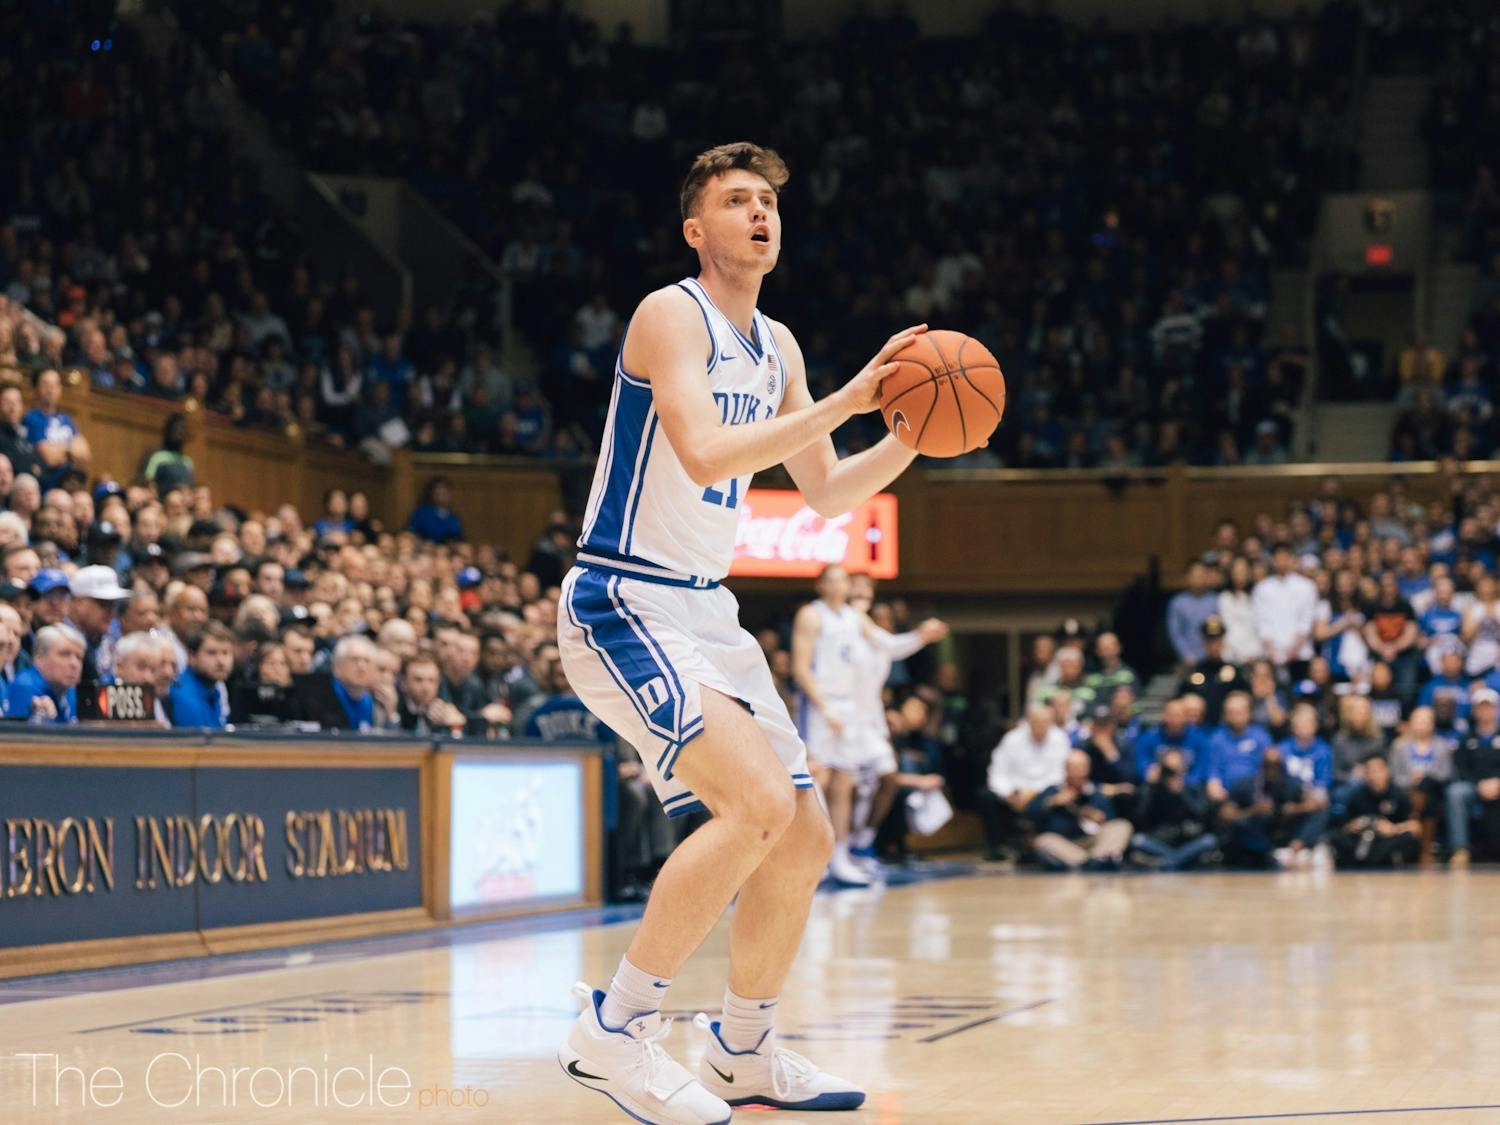 Hurt leads the Blue Devils in 3-point percentage and 3-point field goals.